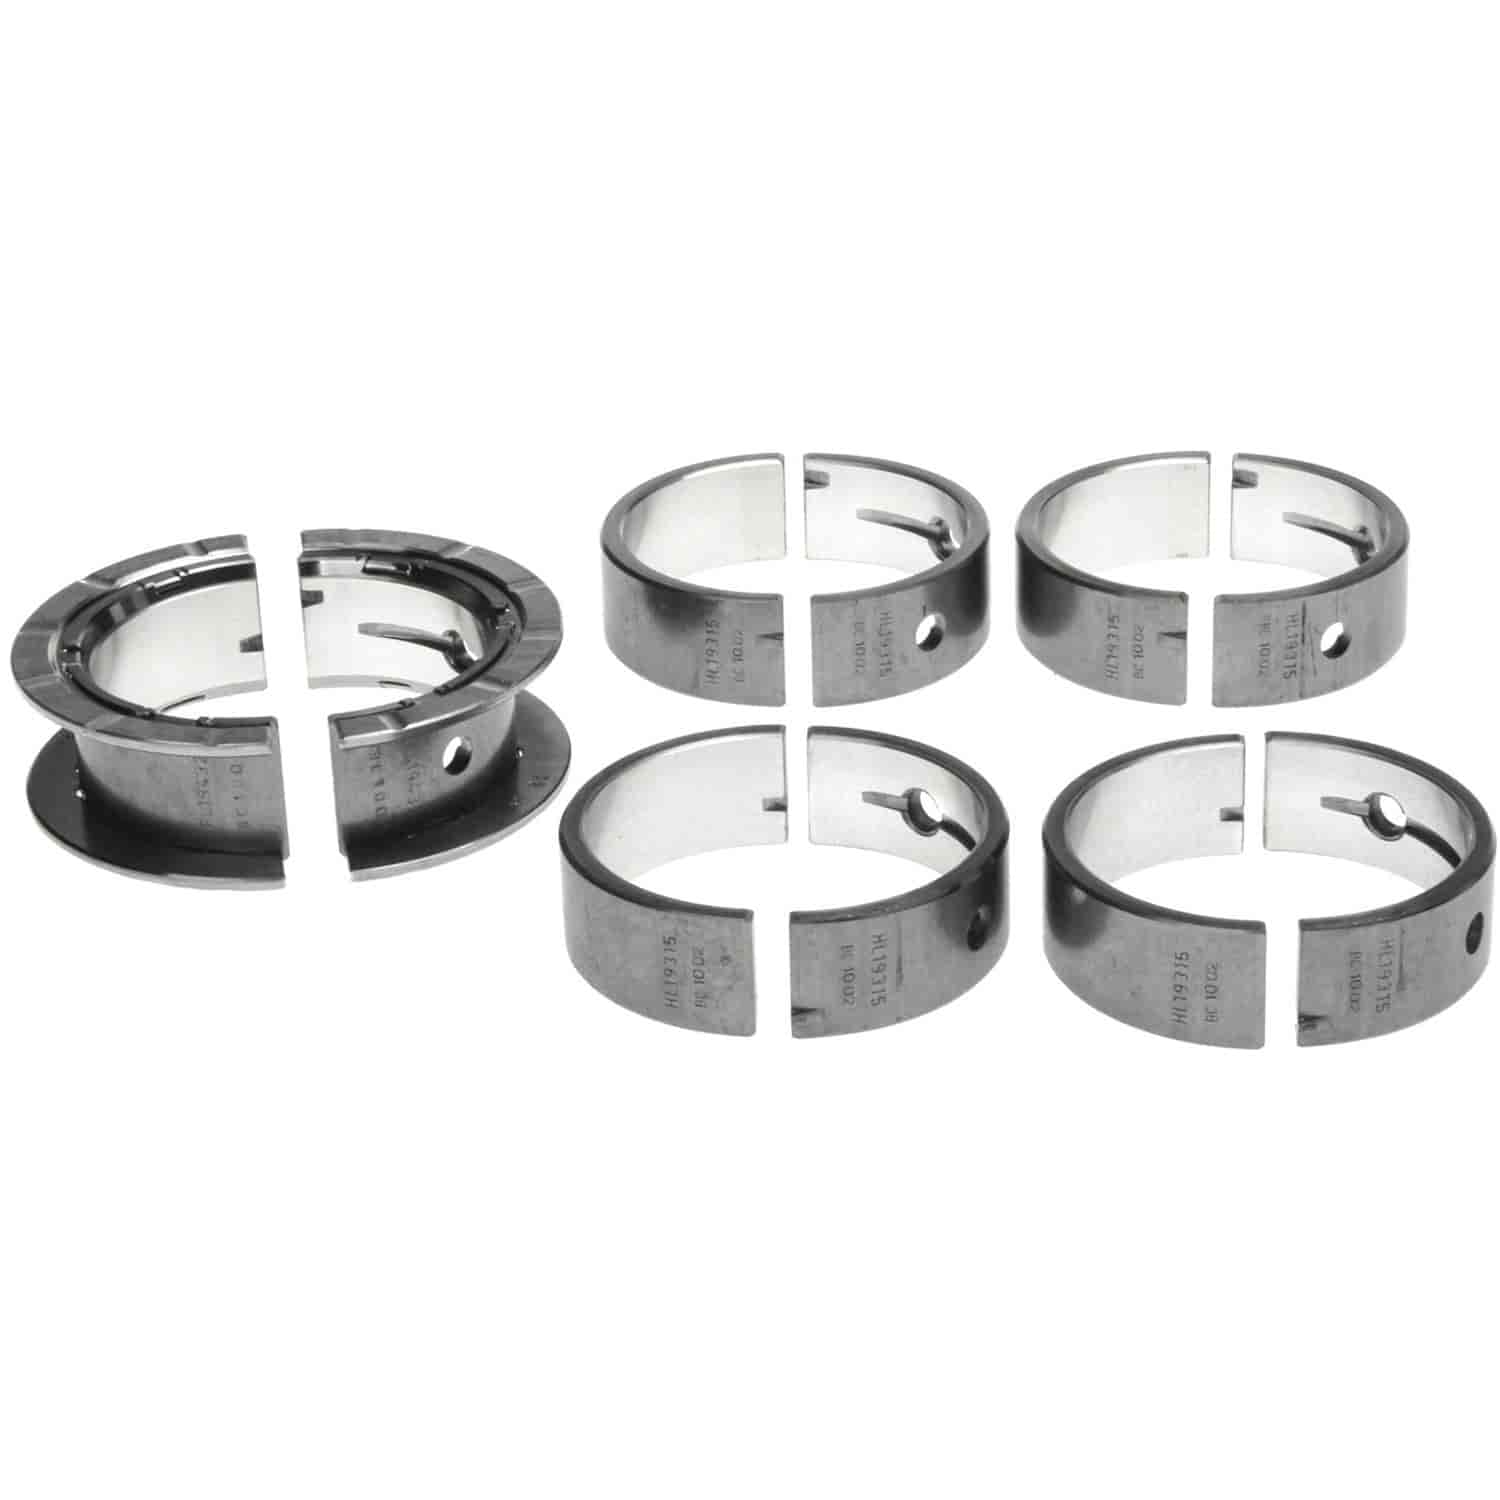 Main Bearing Set Chevy 2000-2015 L4 Ecotec 2.0/2.2/2.4L with -.010" Undersize